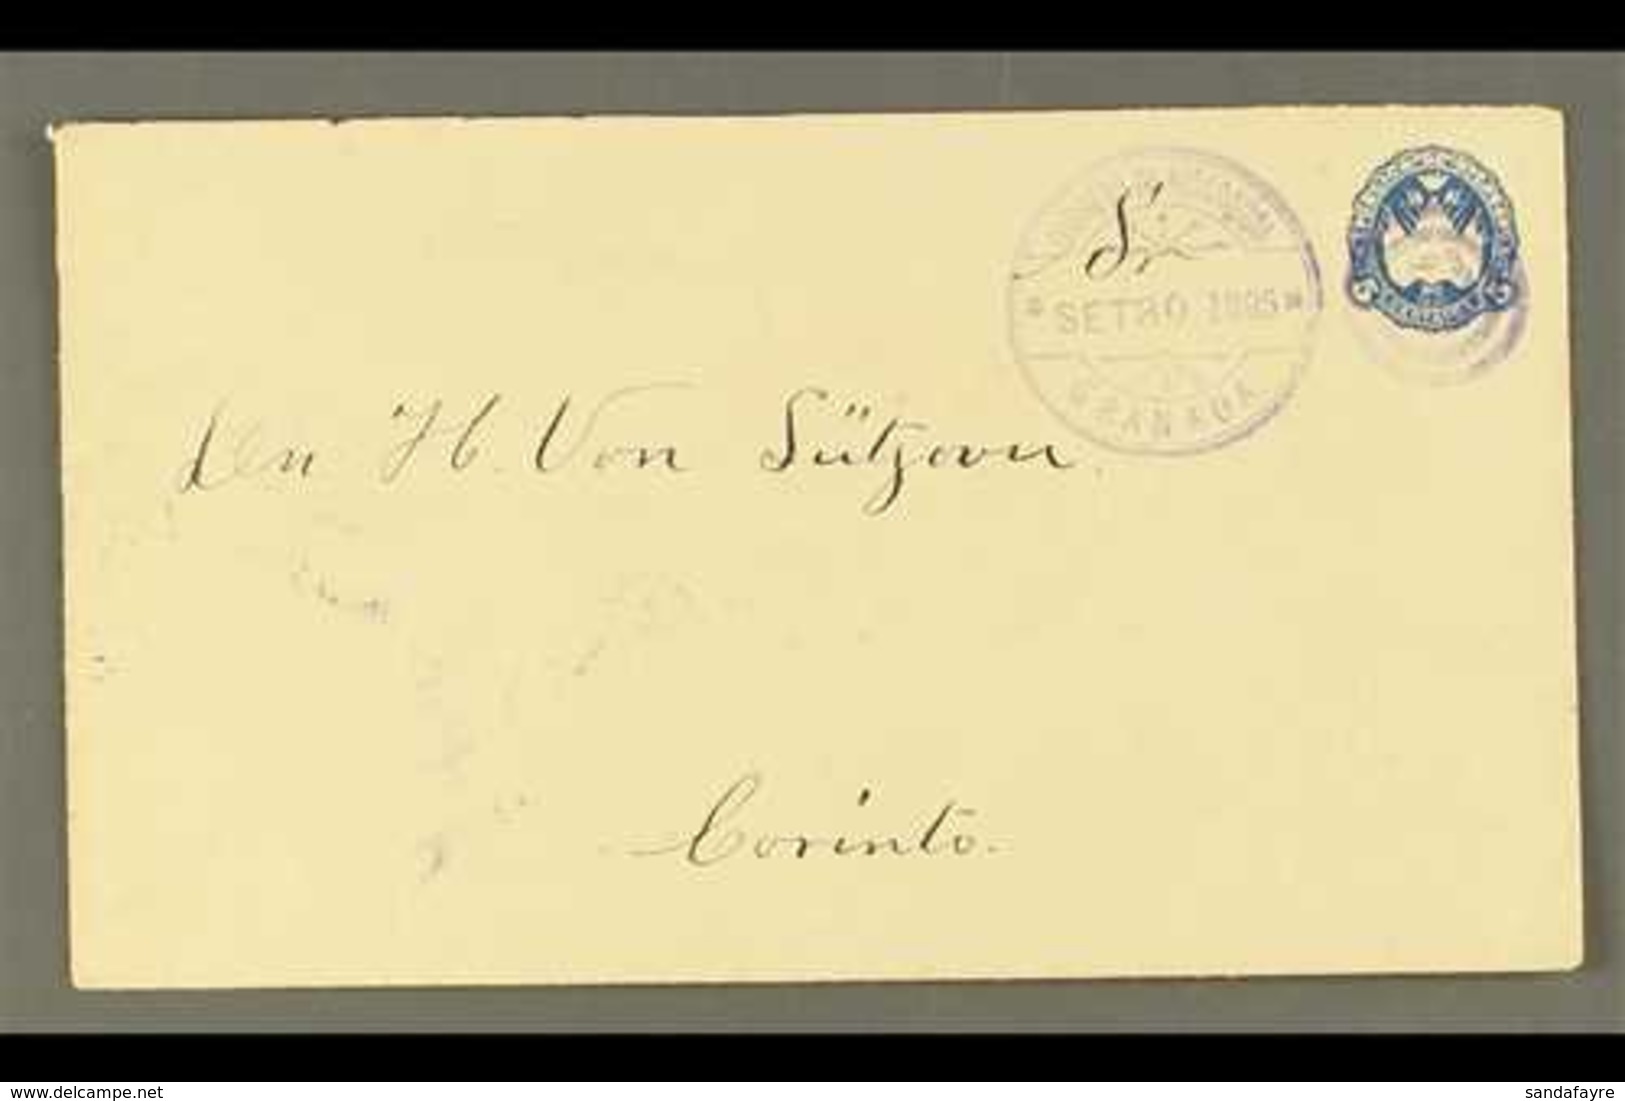 POSTAL STATIONERY 1895 5c Blue, Envelope, H&G 29, Very Fine, Commercially Used With "GRANADA / SET 30 1895" Cancel, Simi - Nicaragua